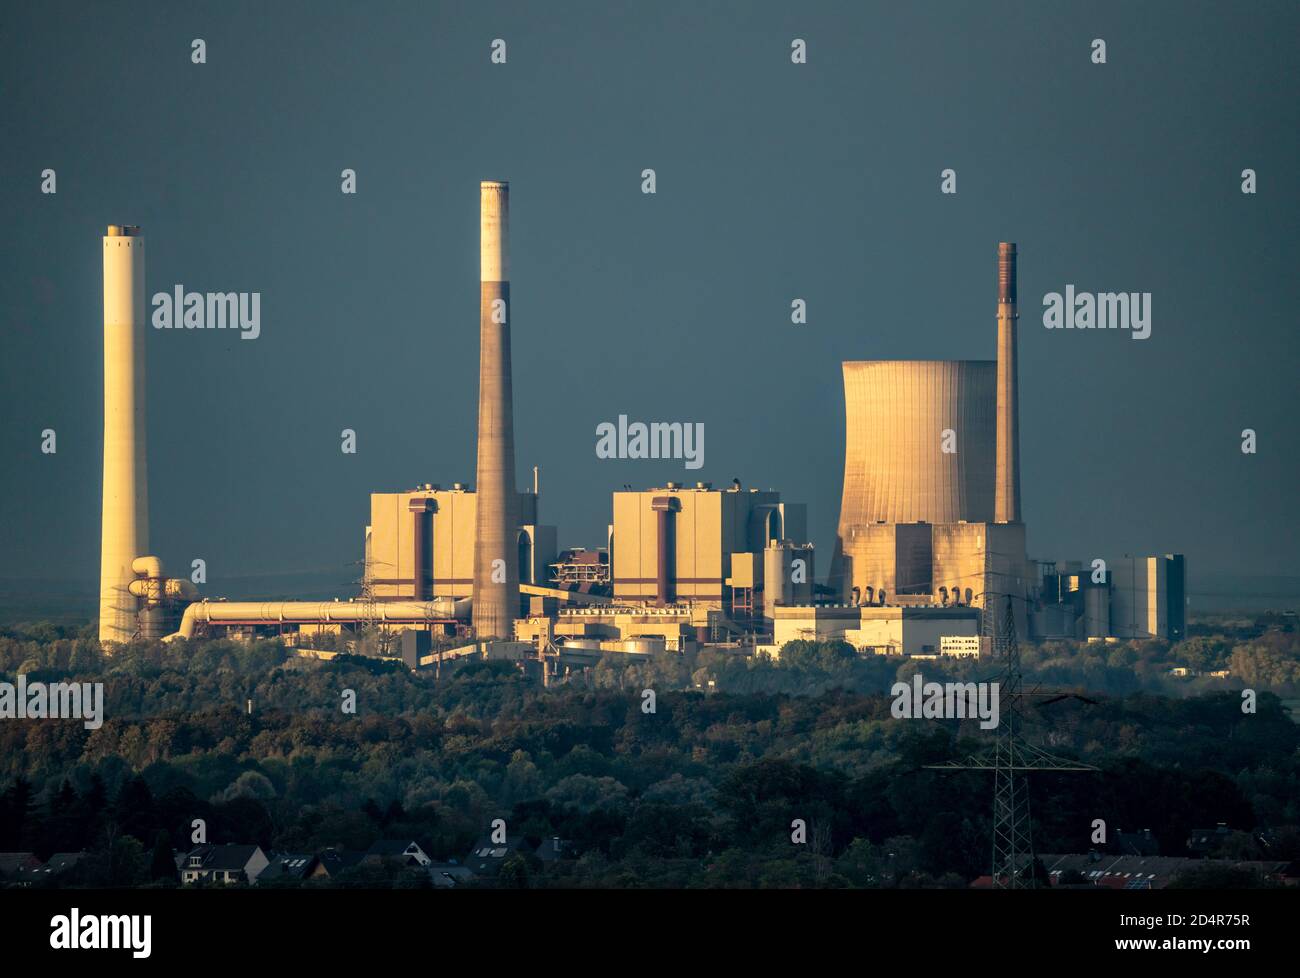 The decommissioned Voerde coal-fired power plant, STEAG, Lower Rhine, Voerde, NRW, Germany, Stock Photo